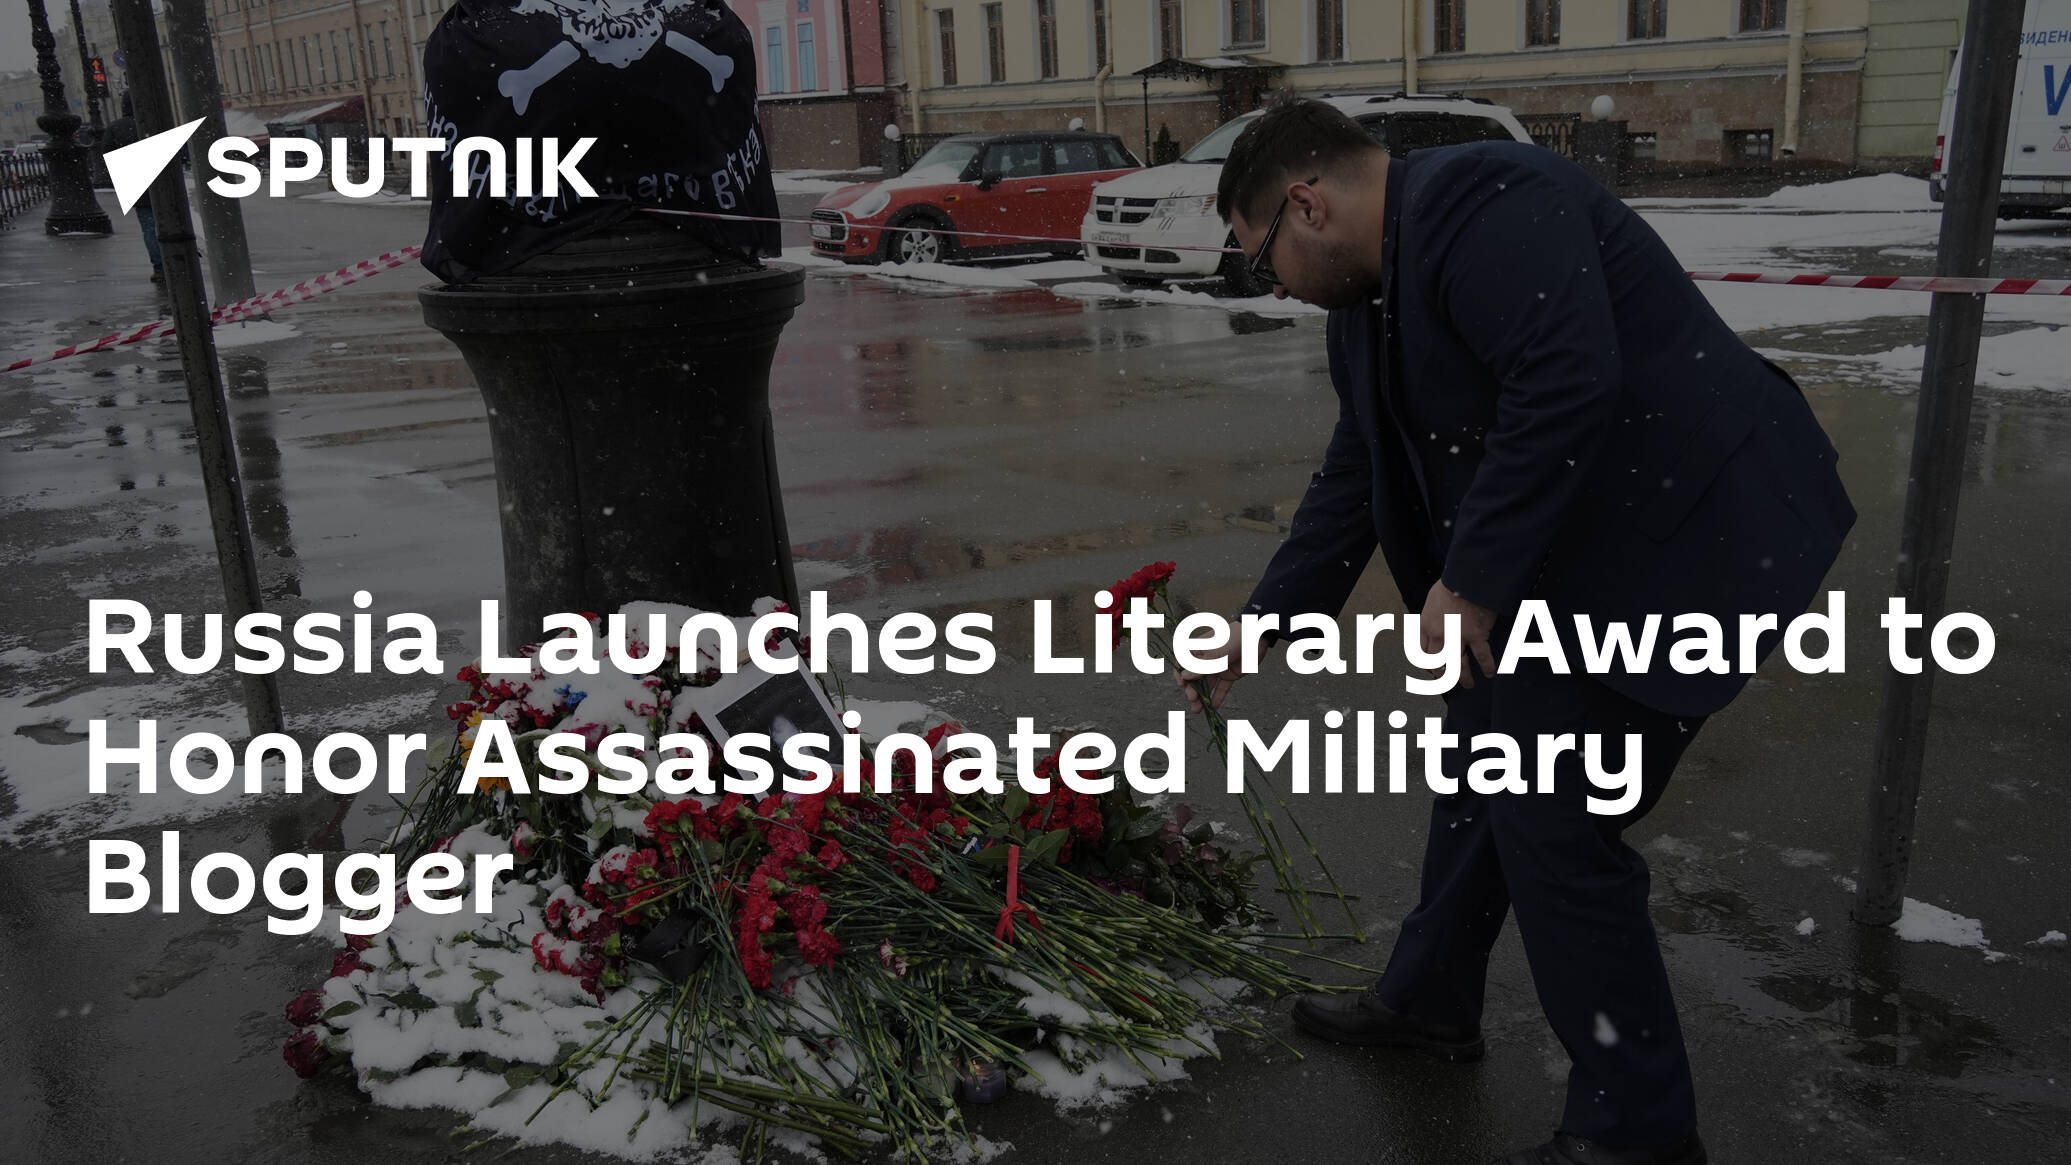 Russia Launches Literary Award to Honor Assassinated Military Blogger